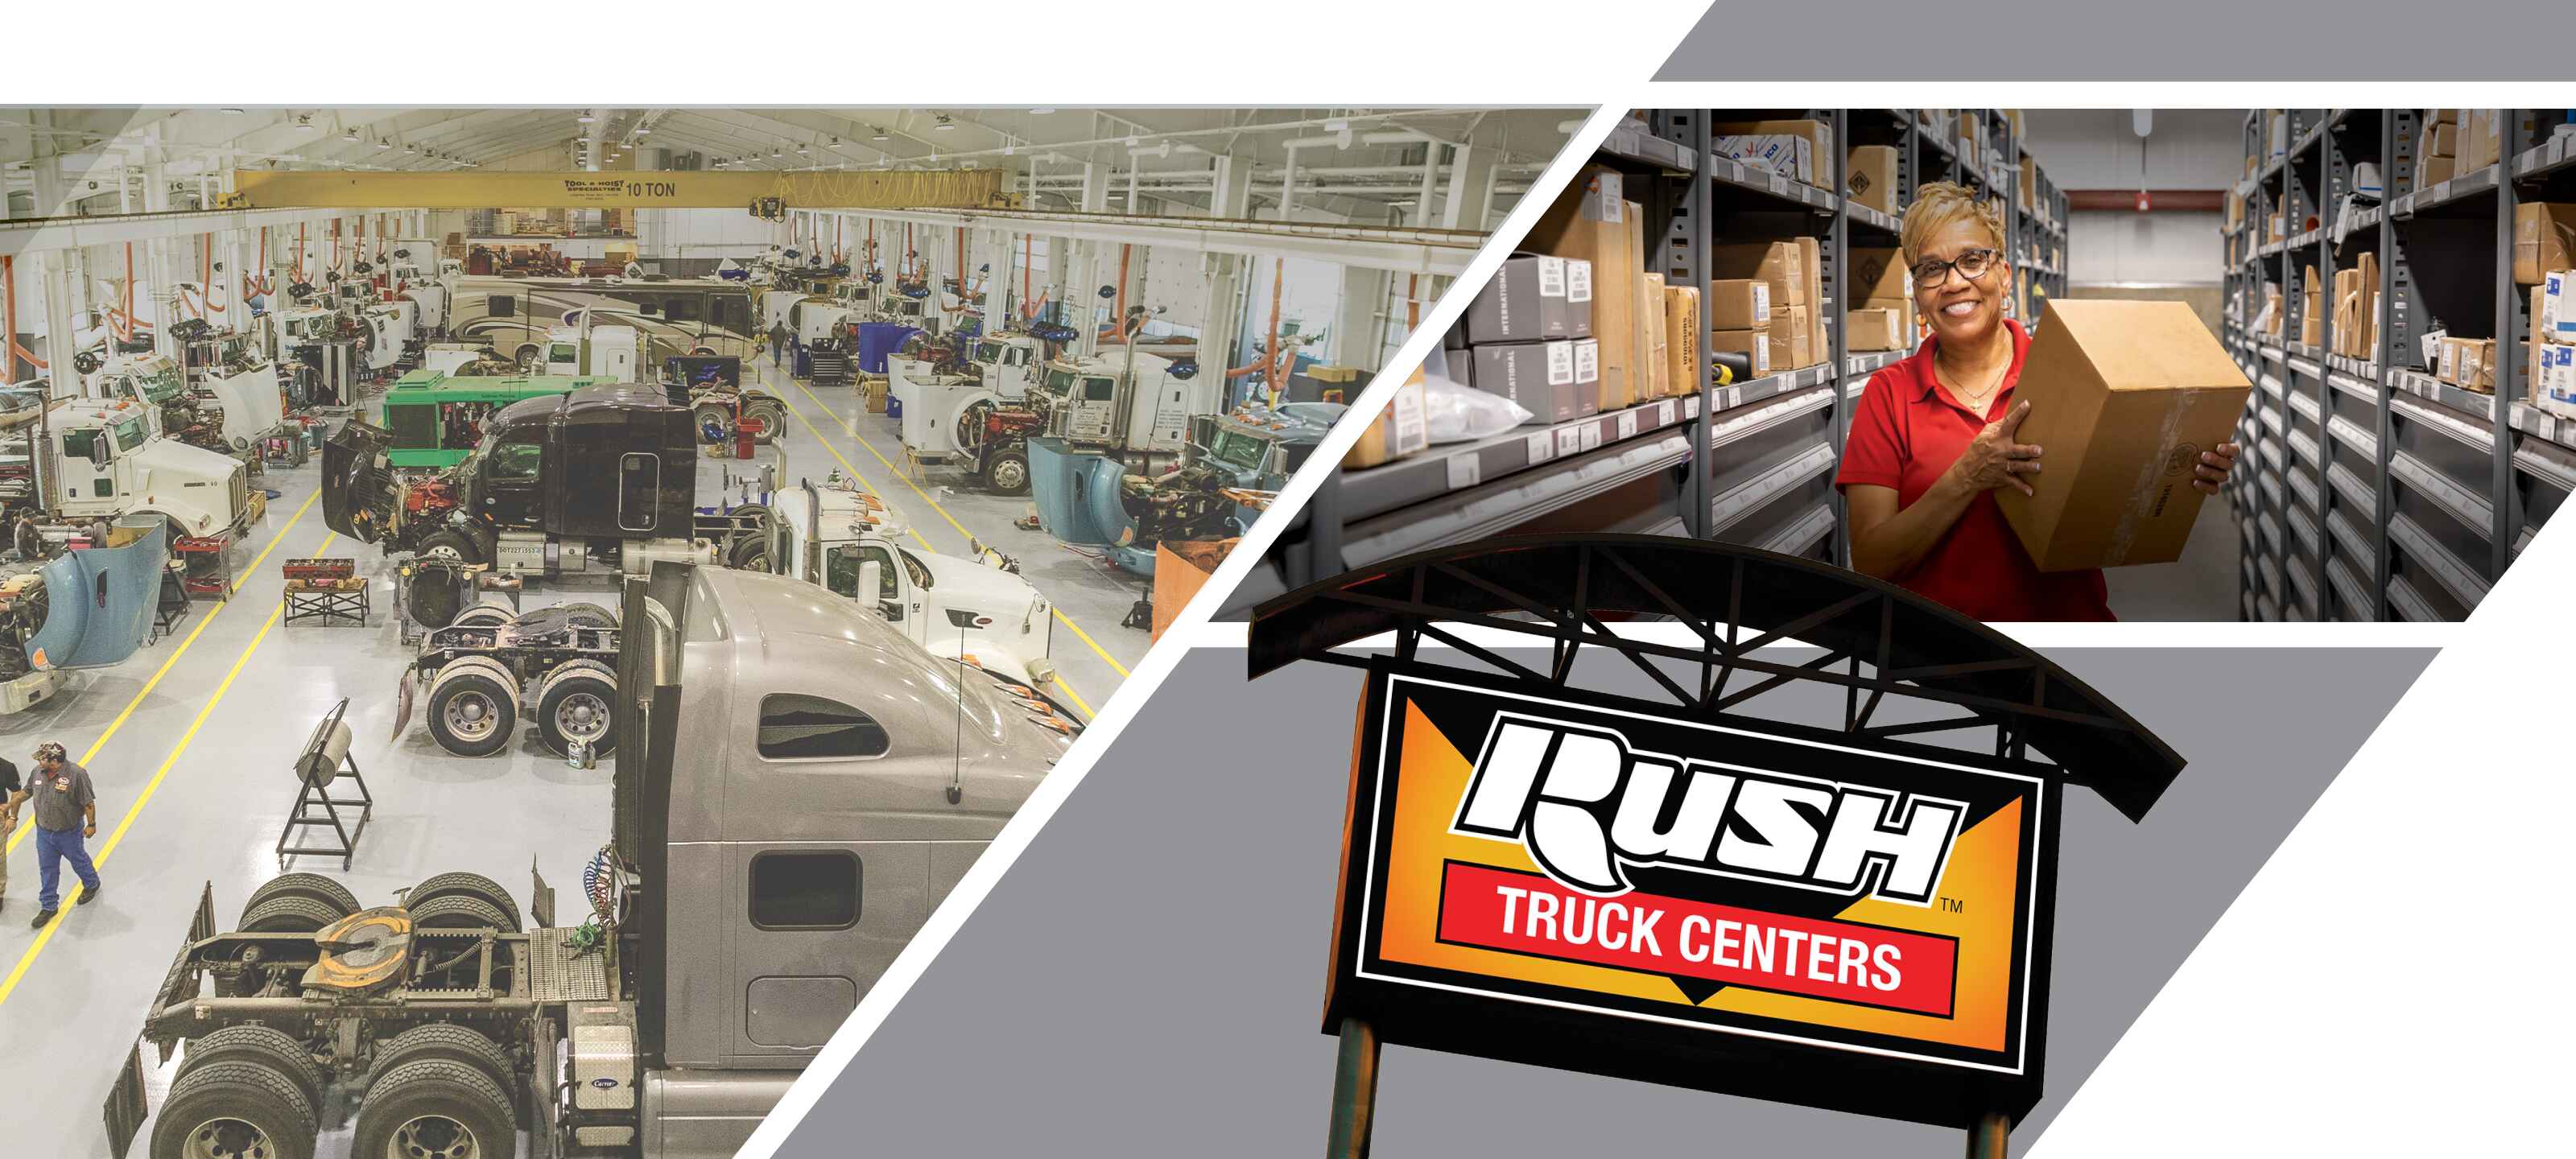 Rush Truck Centers Total Solutions